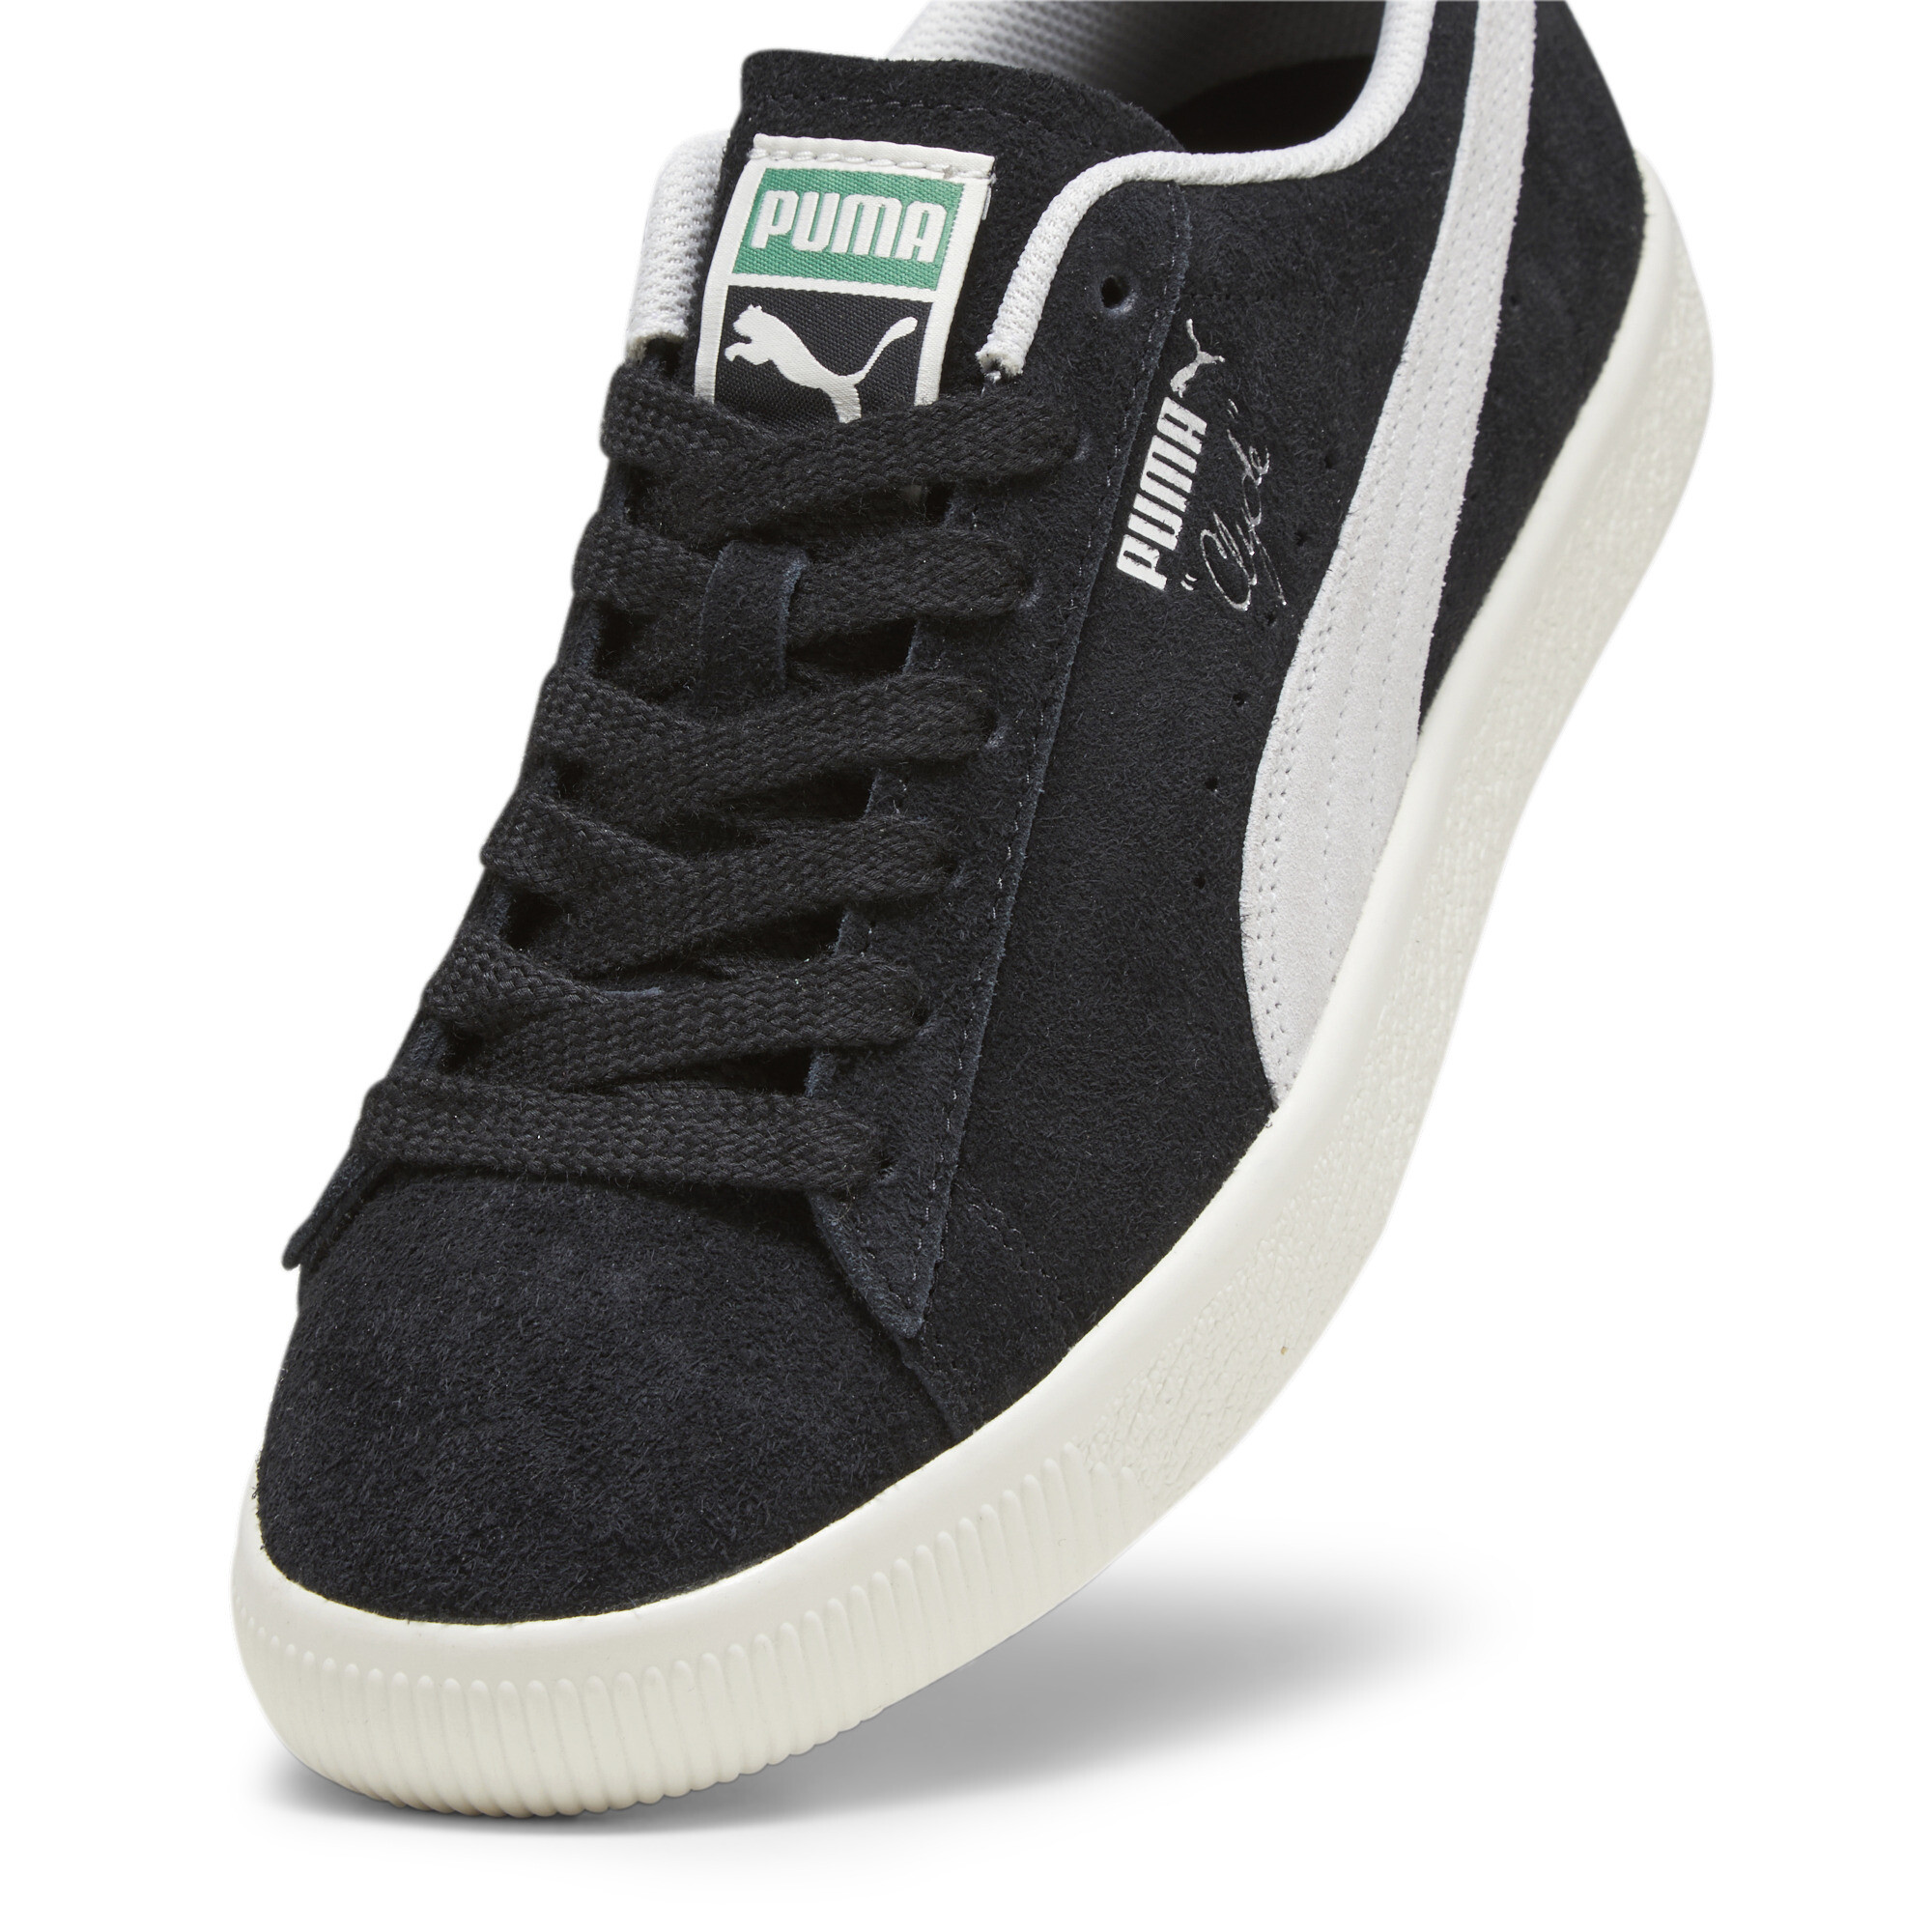 Men's PUMA Clyde Hairy Suede Sneakers In Black, Size EU 43